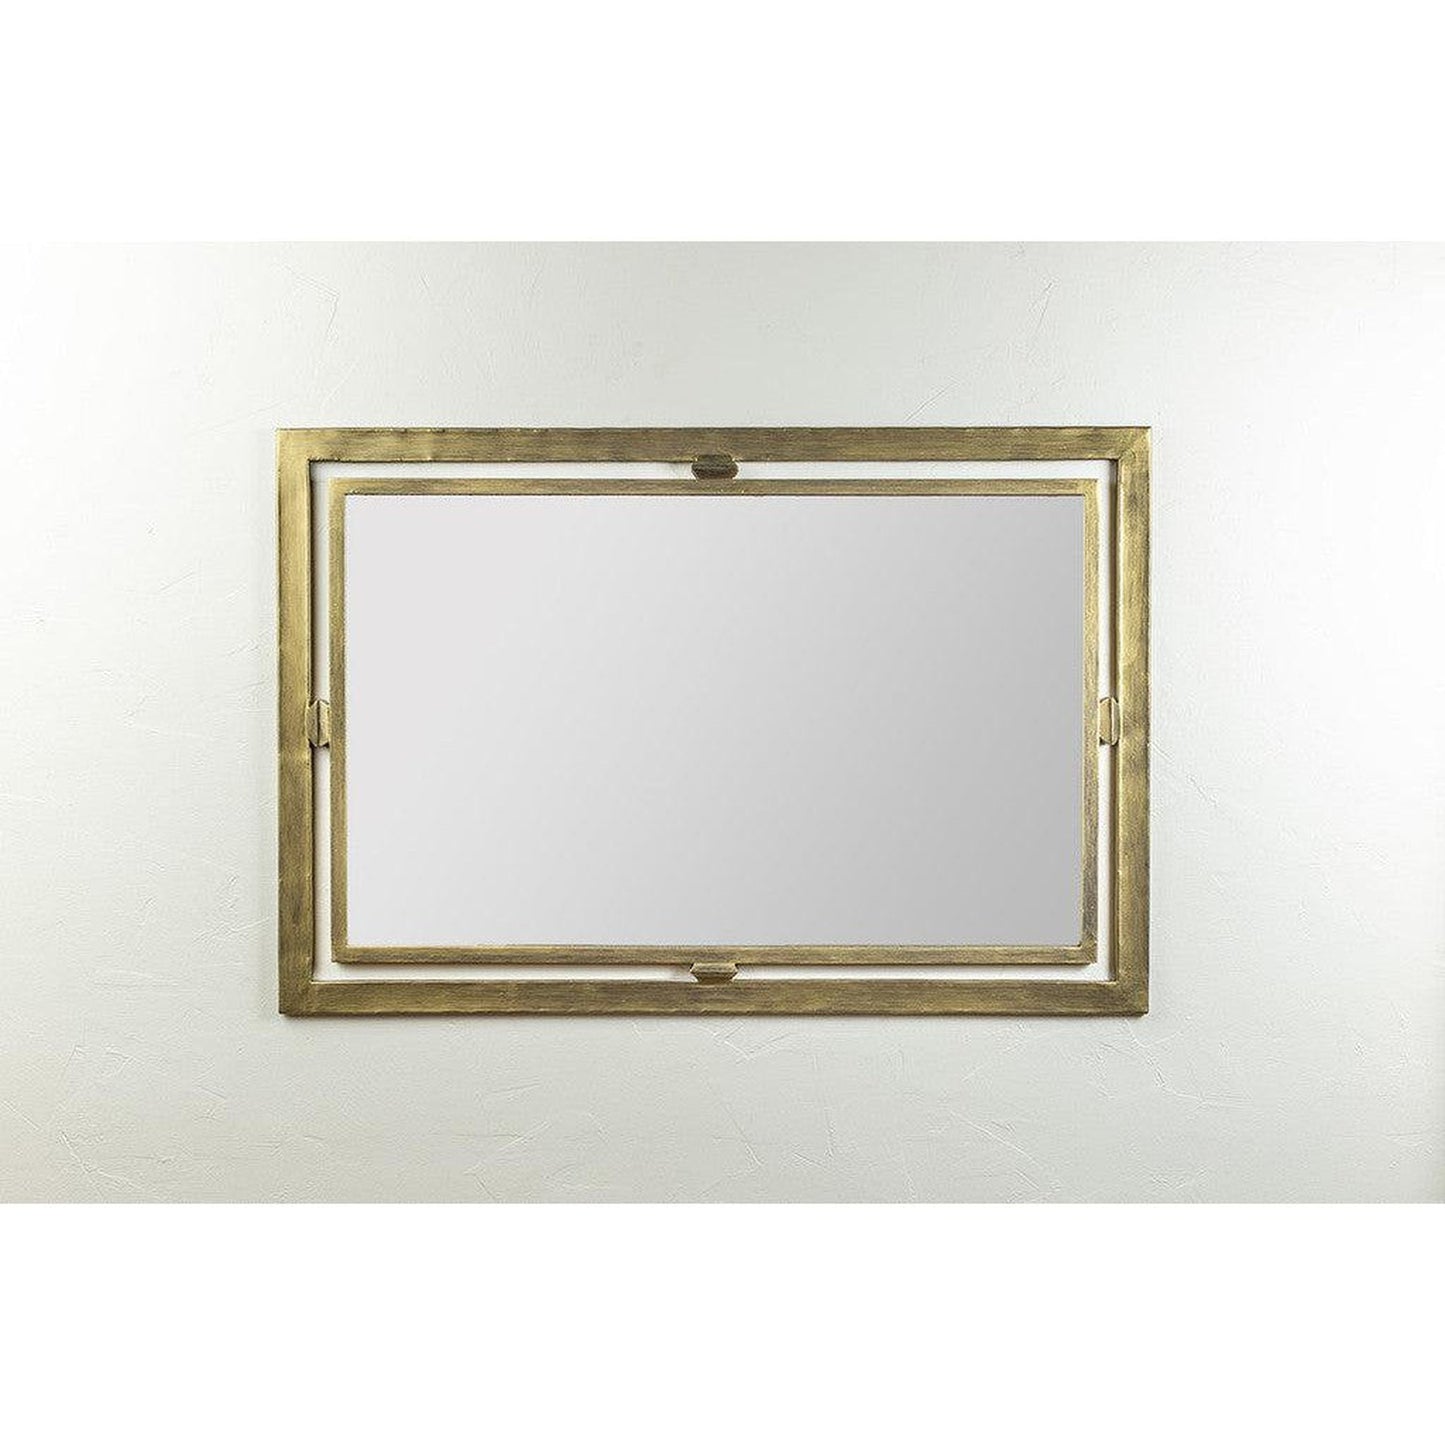 Stone County Ironworks Forest Hill 27" x 40" Large Hand Rubbed Ivory Iron Wall Mirror With Pewter Iron Accent